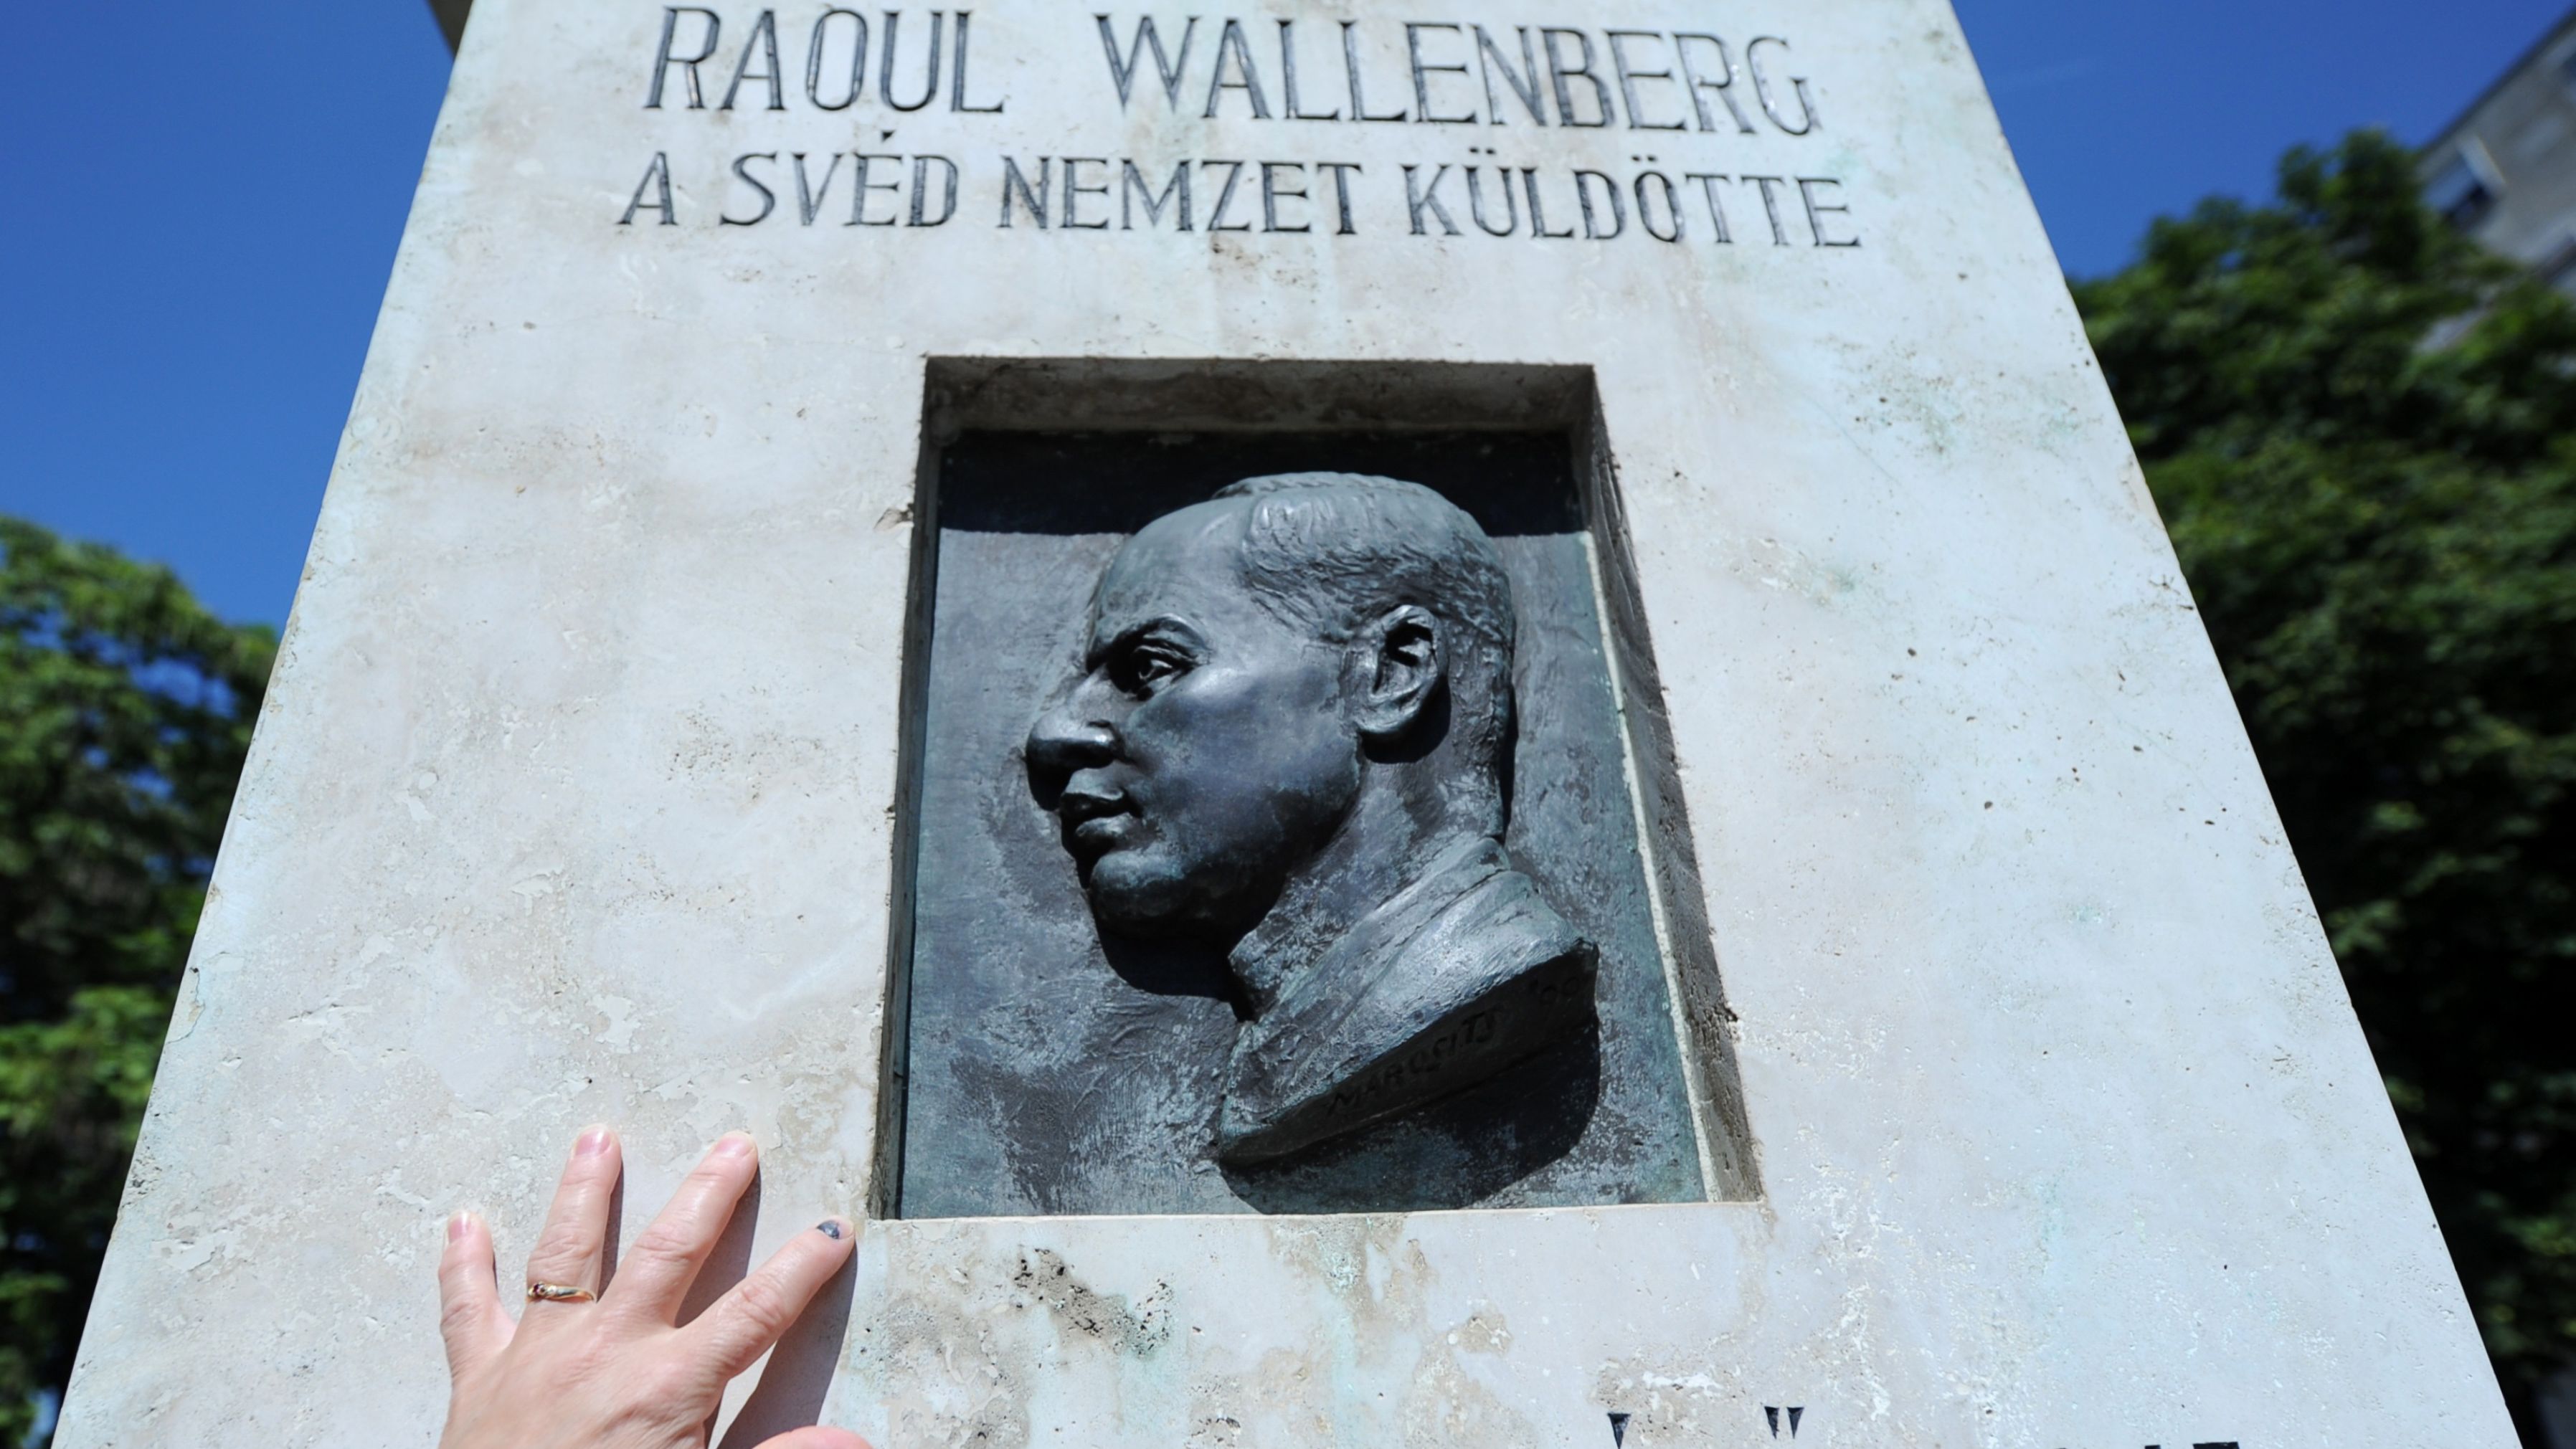 Wallenberg has been honored for his wartime efforts around the globe. He was awarded the US Congressional Gold medal in 2012. Pictured, a woman touches his memorial in Budapest.